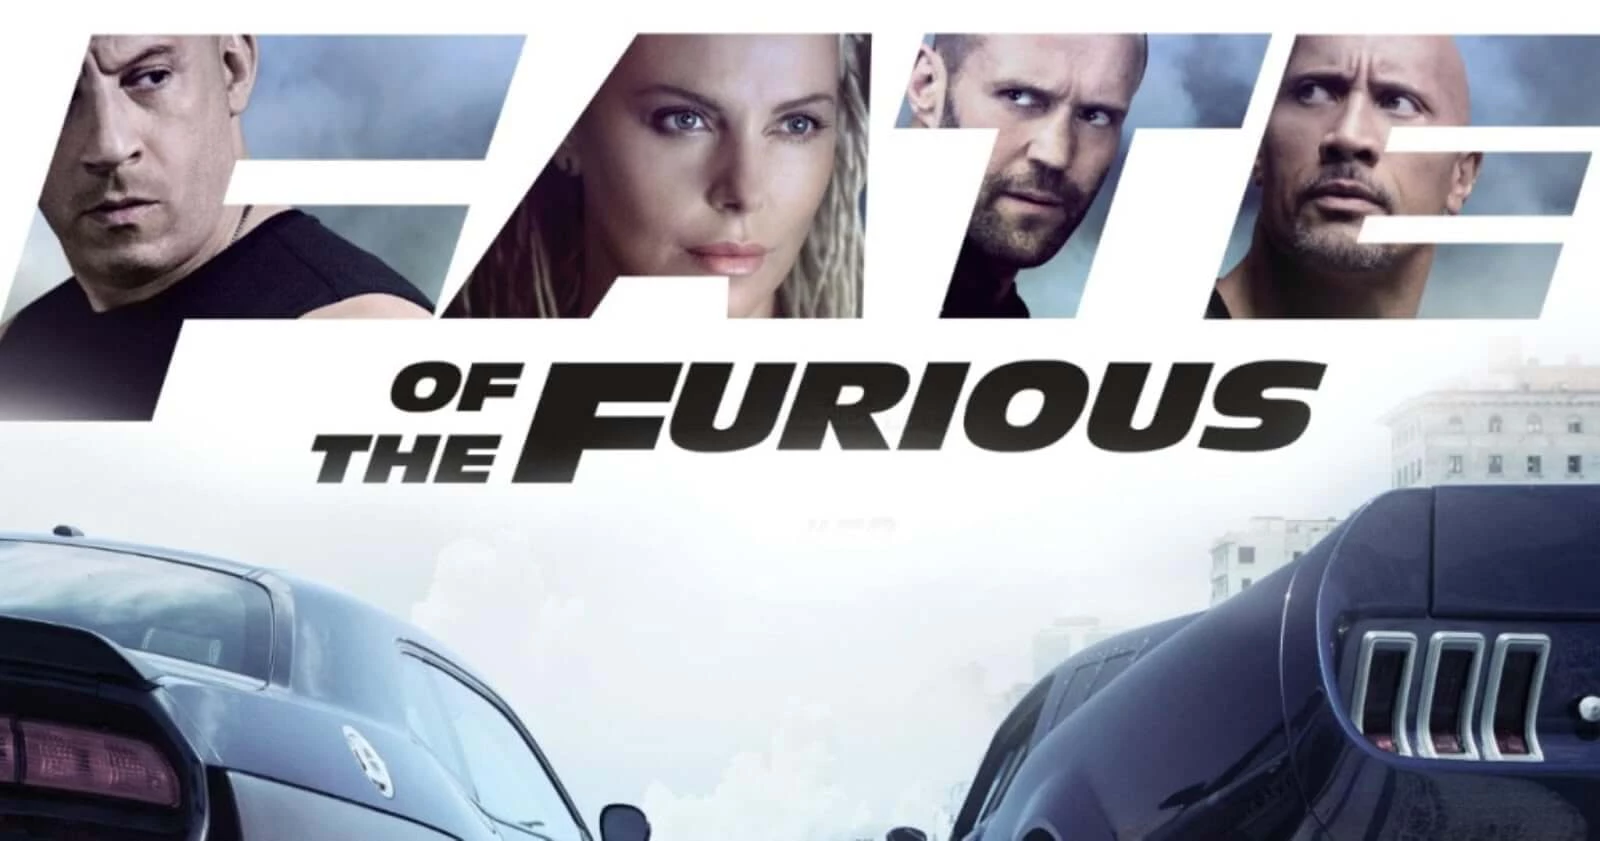 The fate of the furious (2017)